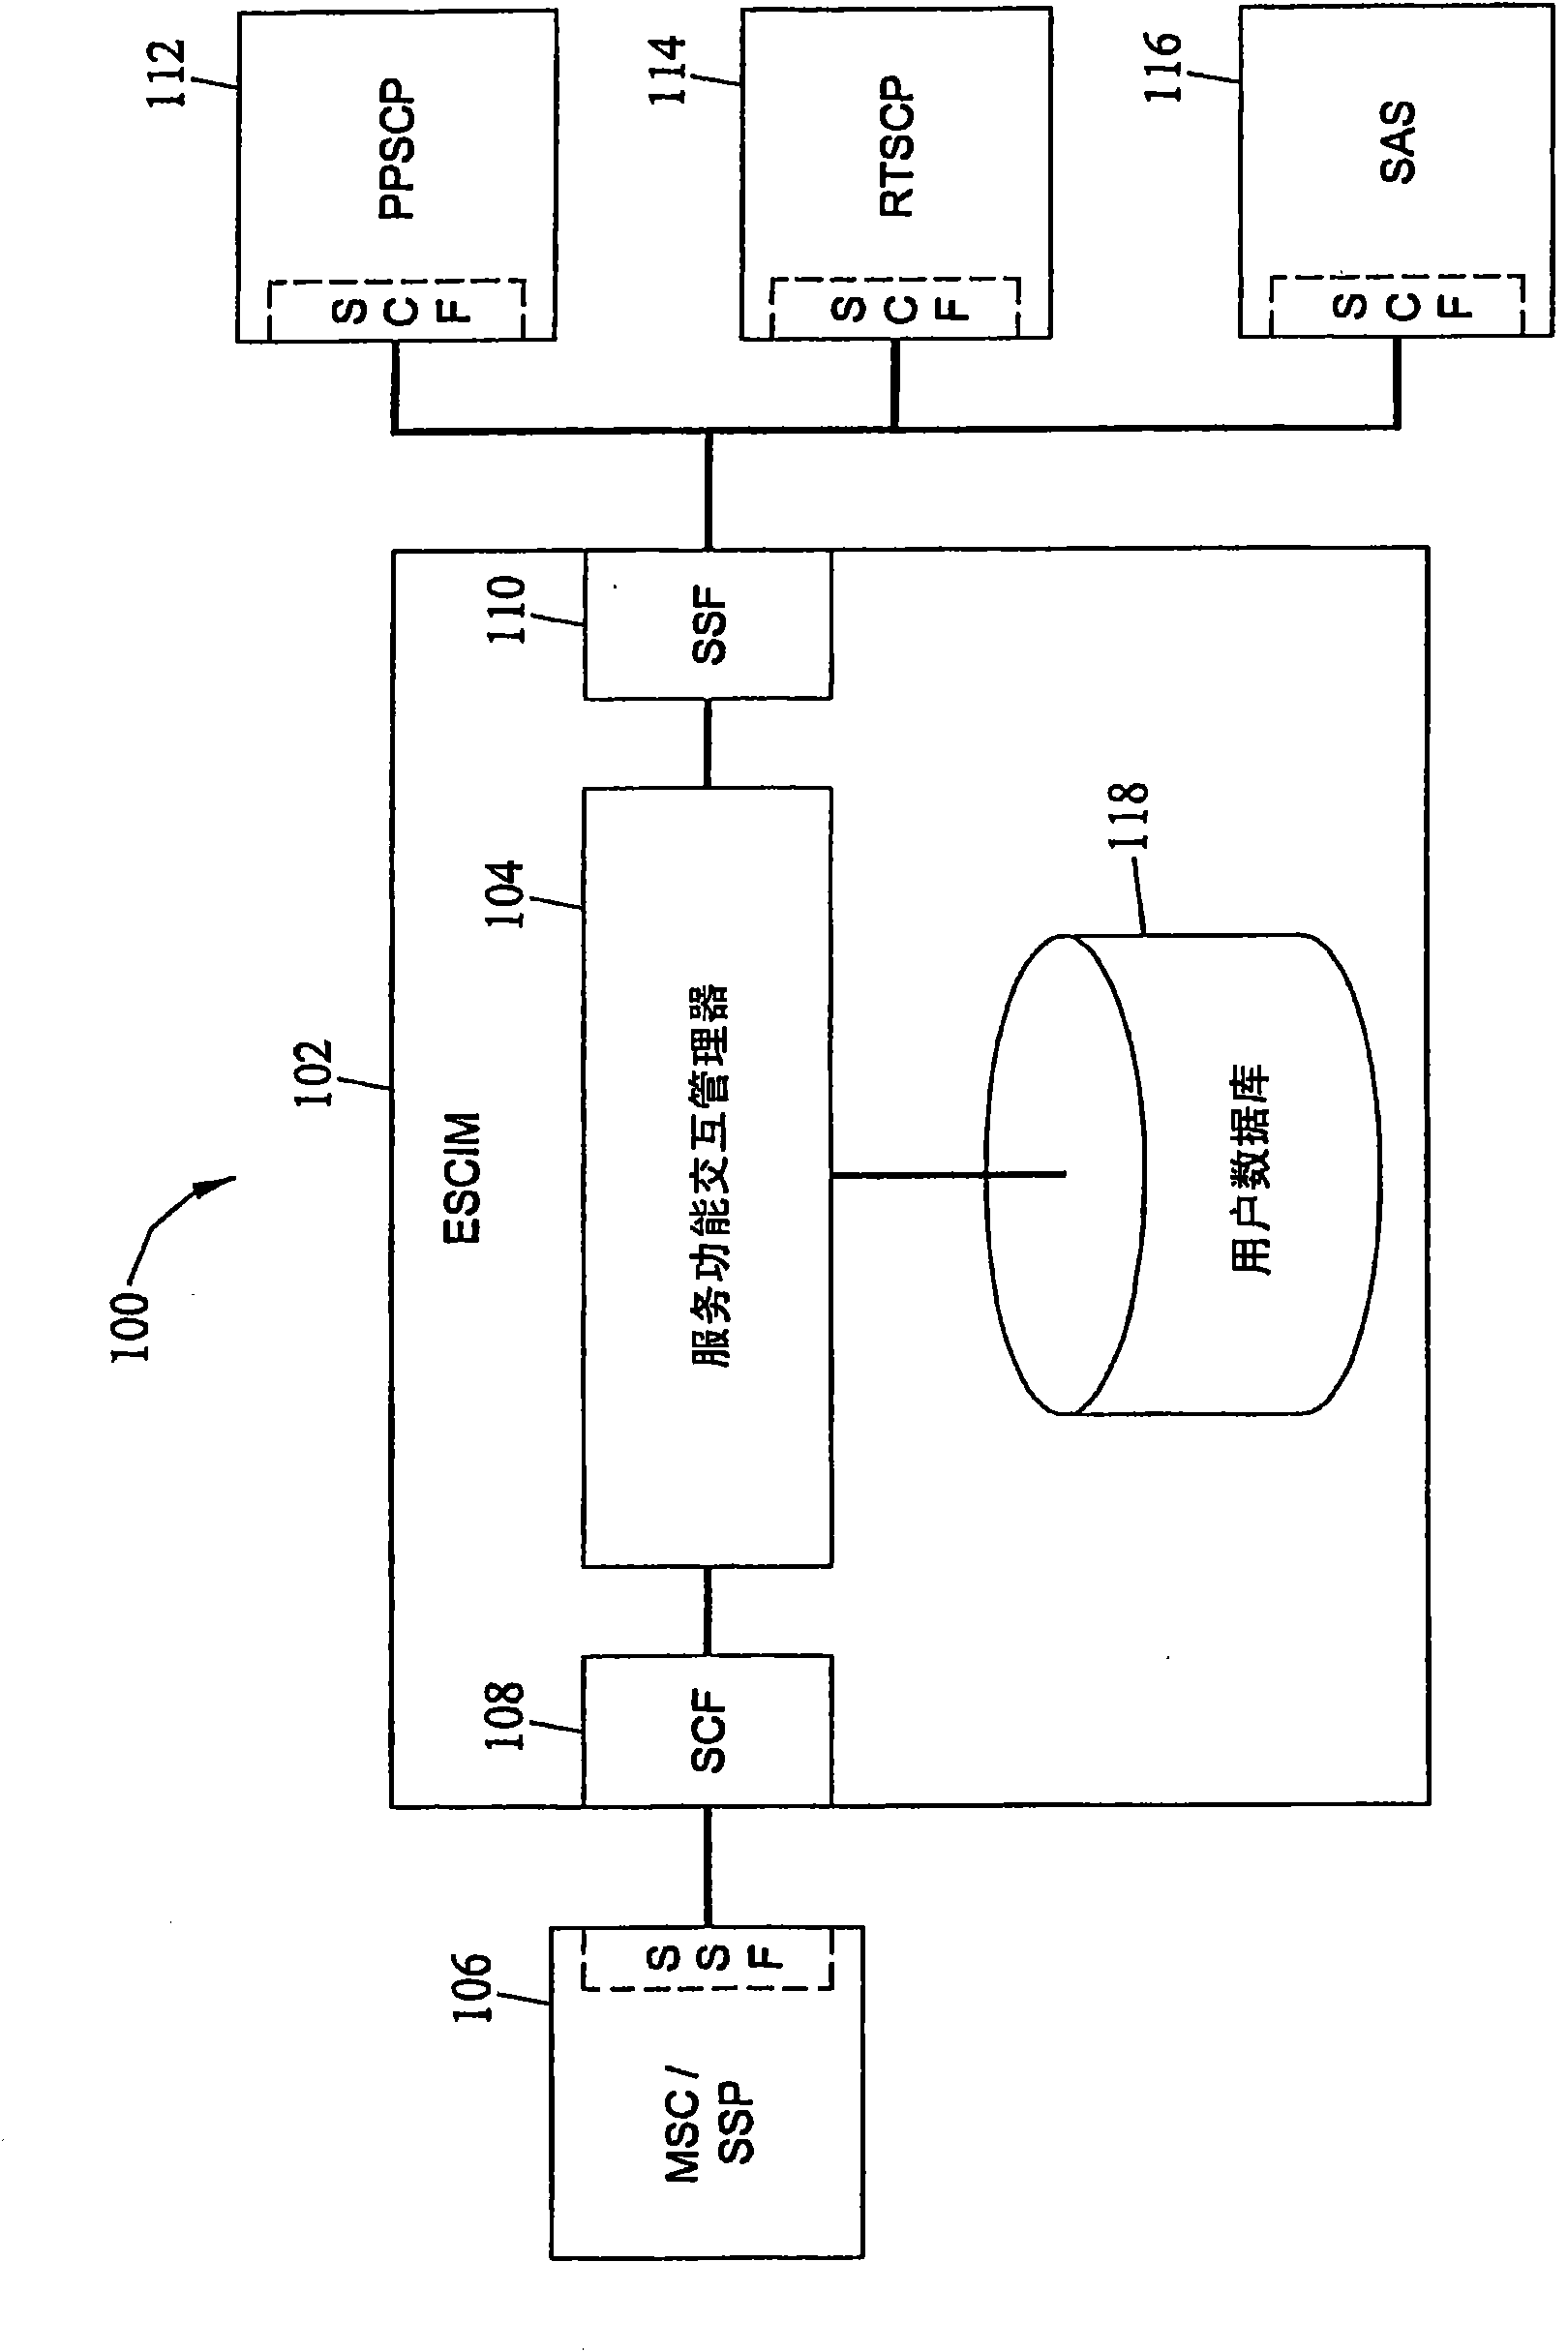 Systems, methods, and computer program products for providing service interaction and mediation in a communications network